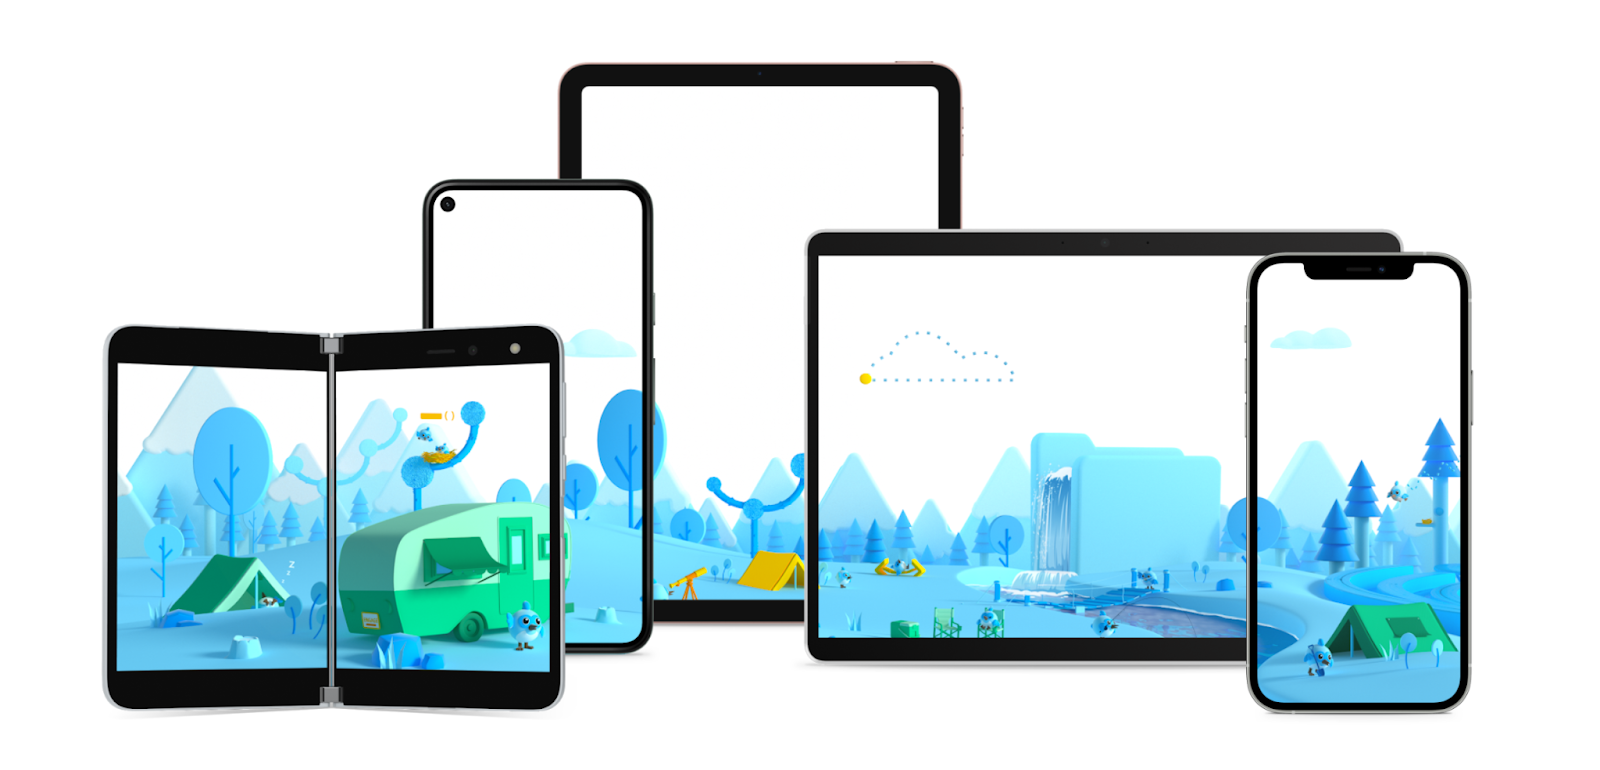 5 tablet and mobile device screens　Flutter2